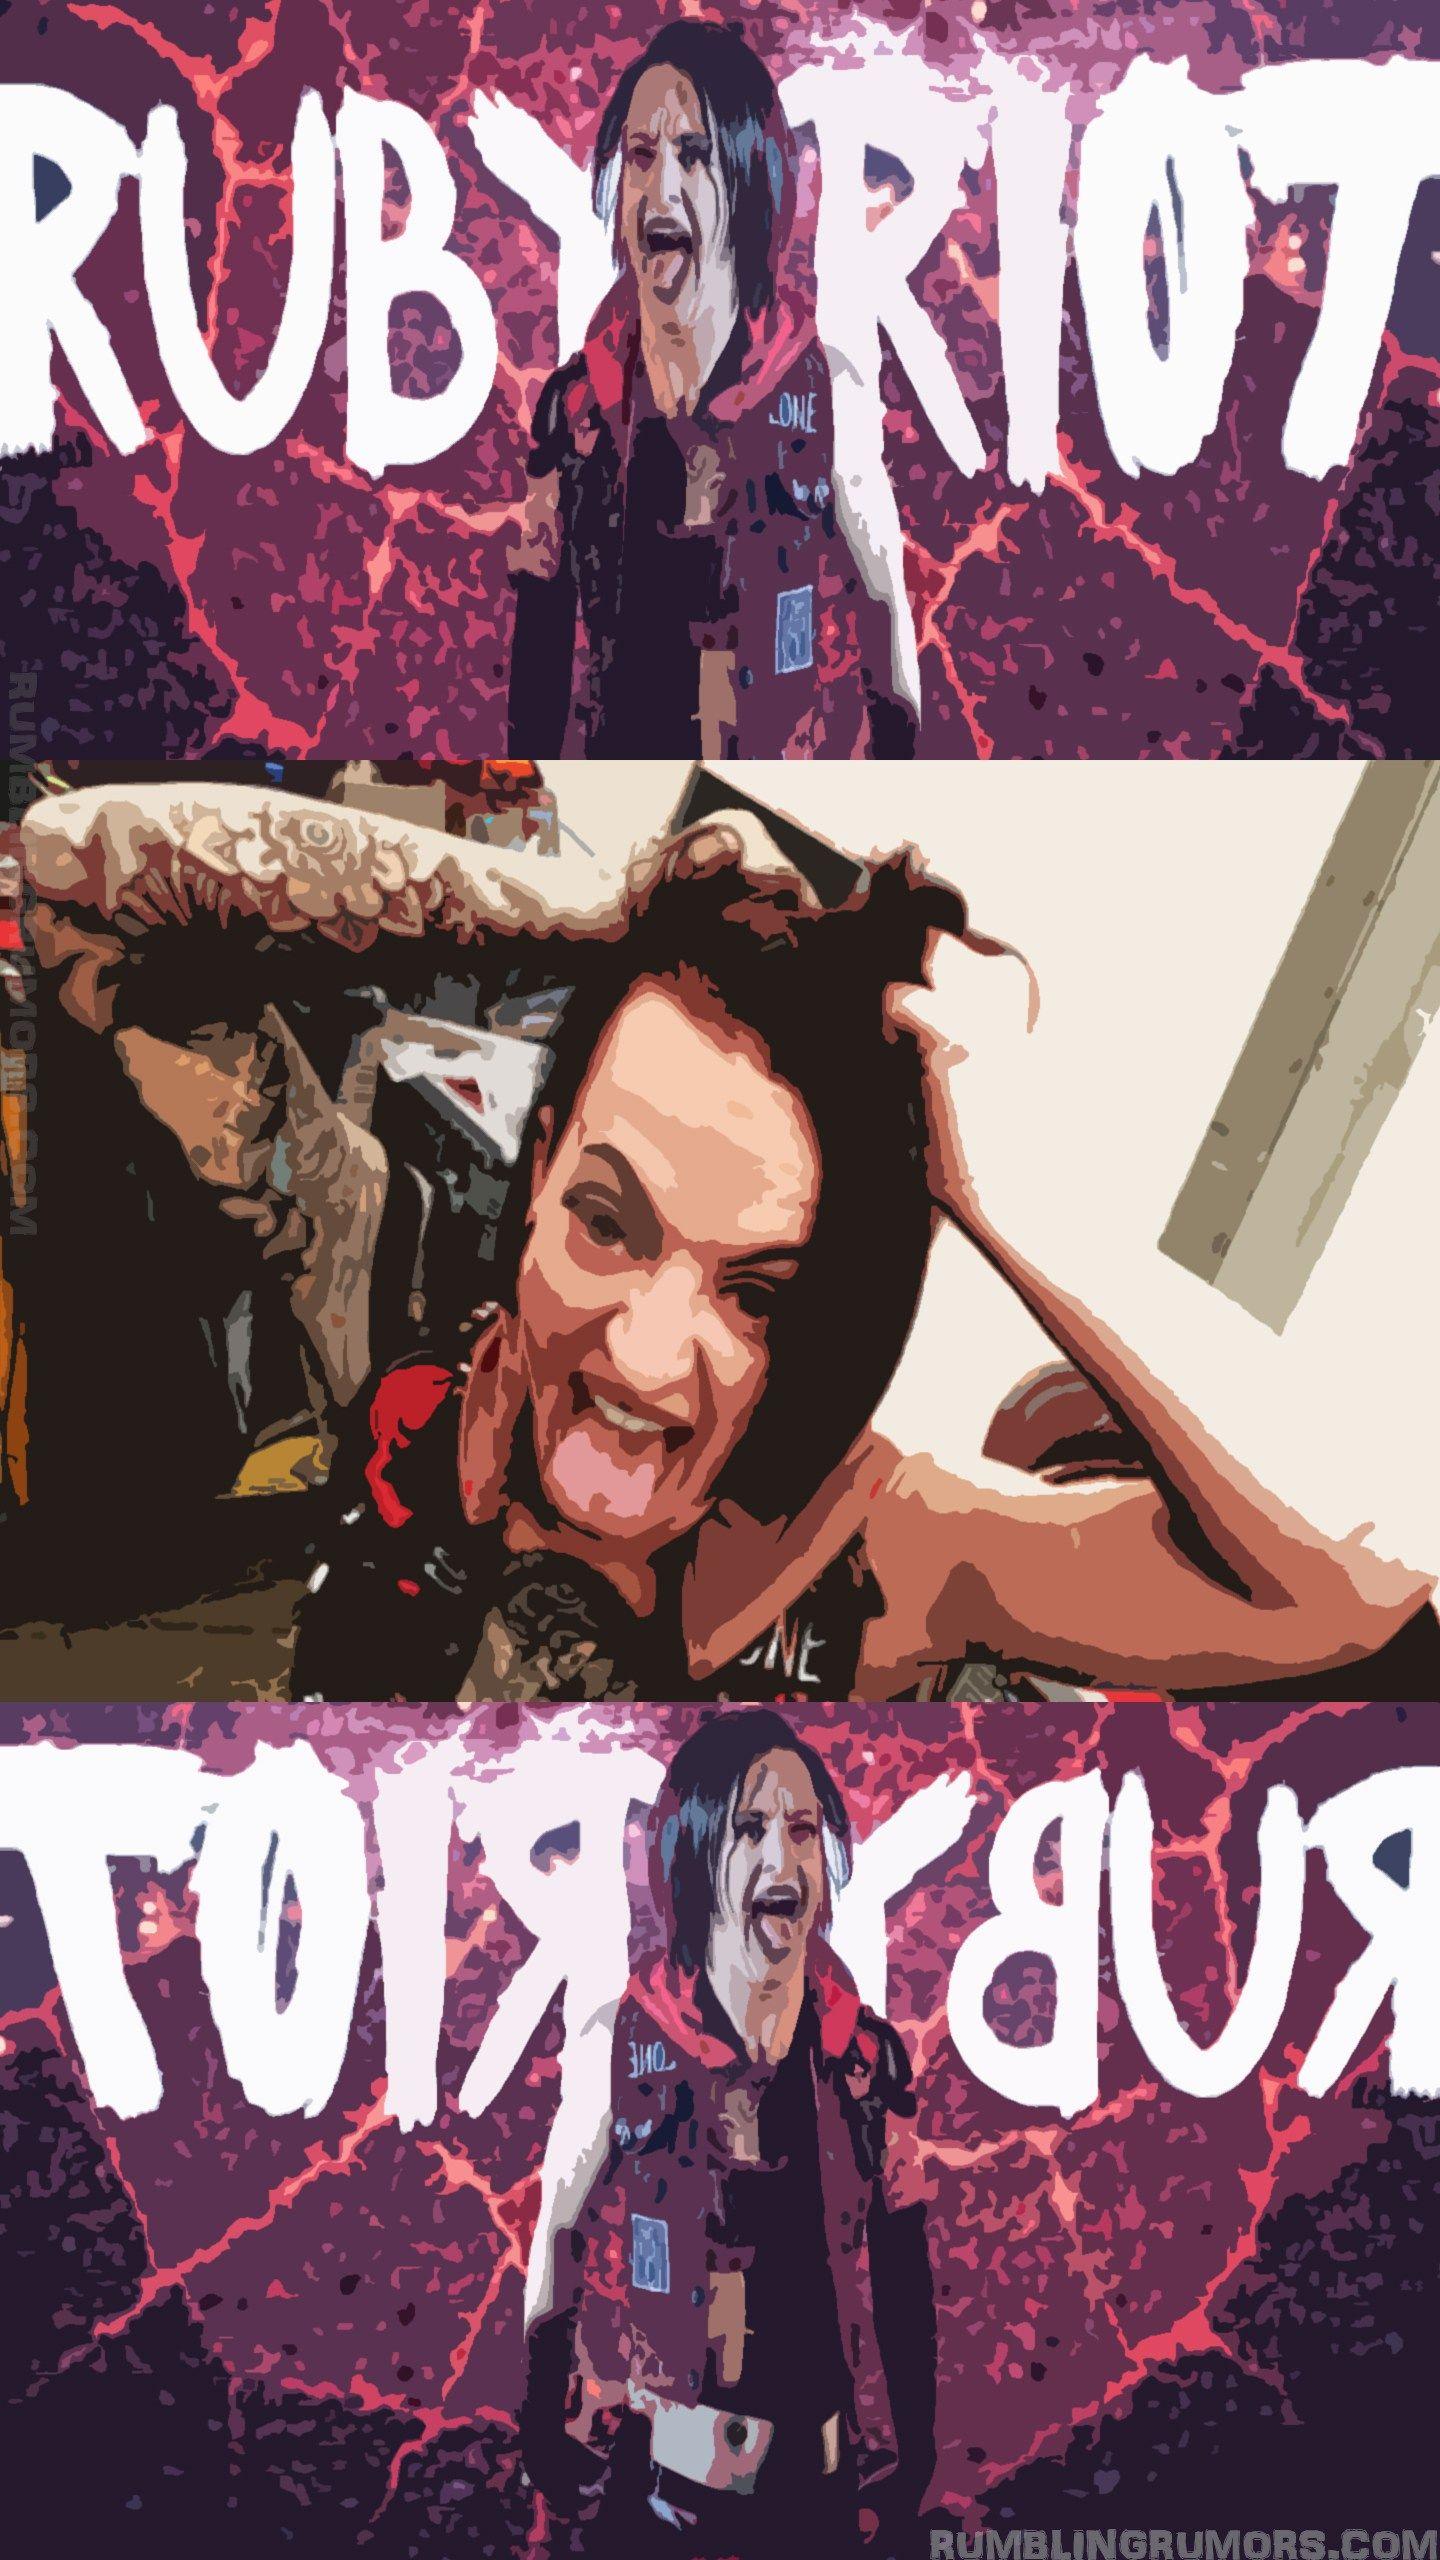 Ruby Riott HD Mobile Wallpaper. WWE Picture, News